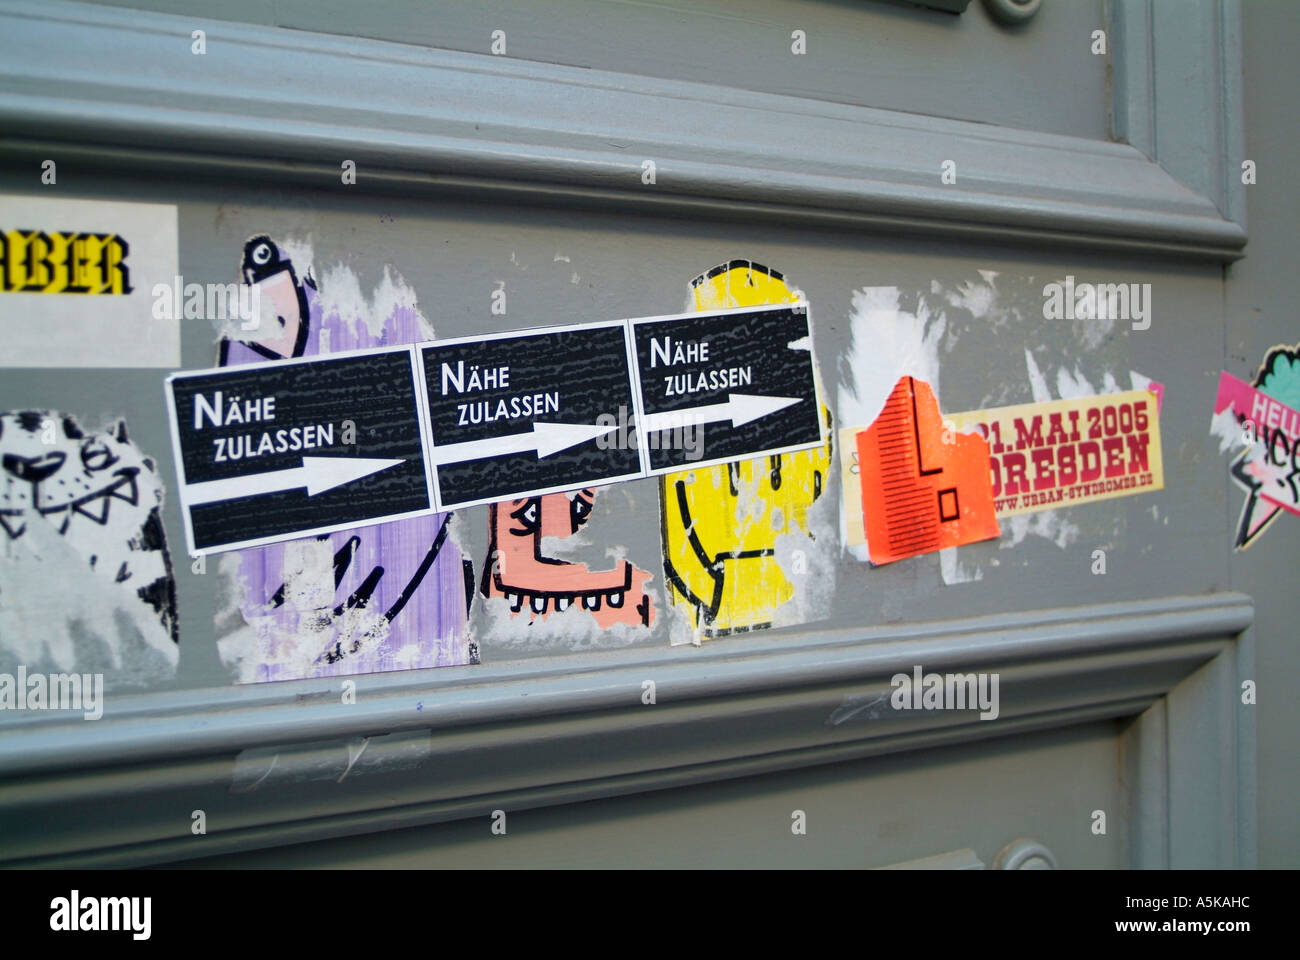 Eastgermany, GER, Germany: Stickers with slogans on a door. Stock Photo